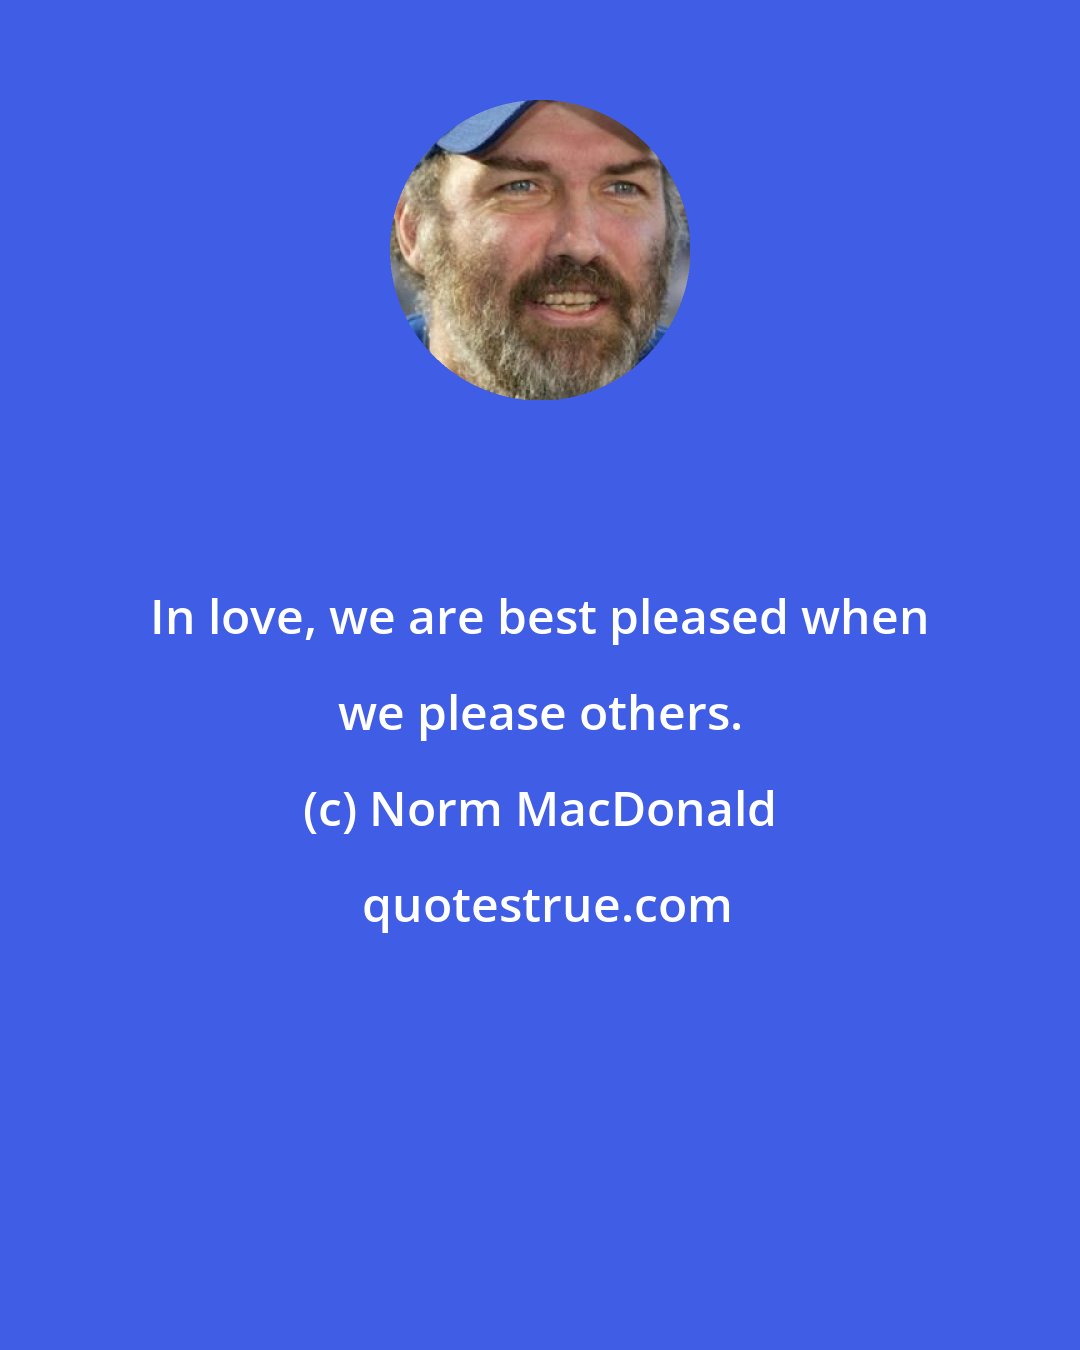 Norm MacDonald: In love, we are best pleased when we please others.